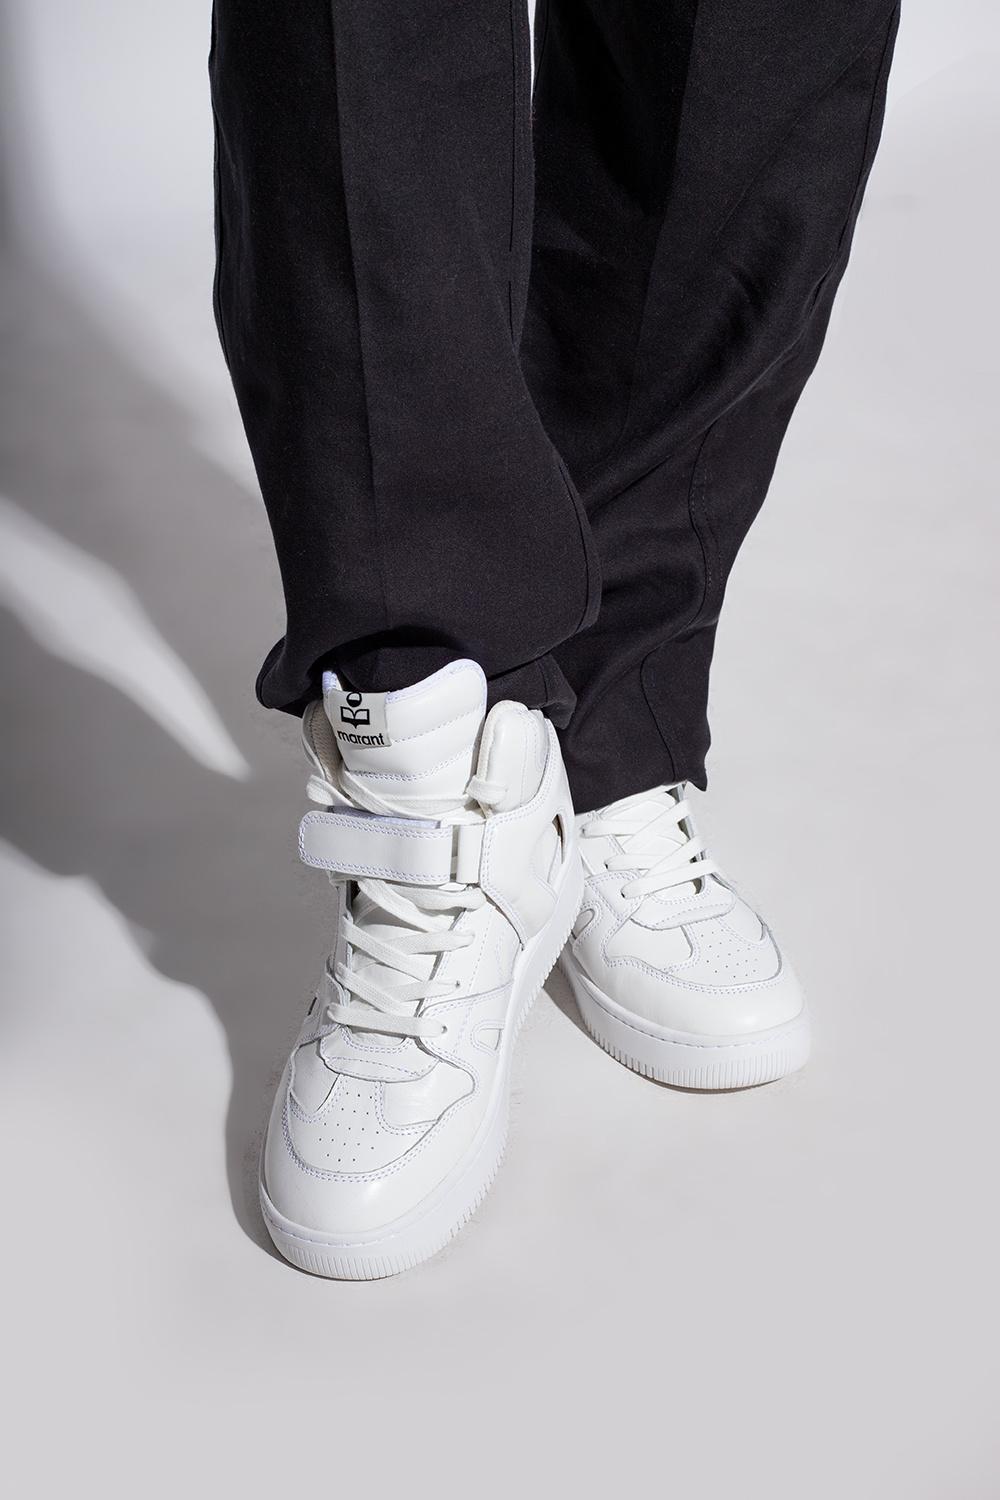 Marant 'brooklee' High-top Sneakers in White | Lyst Canada